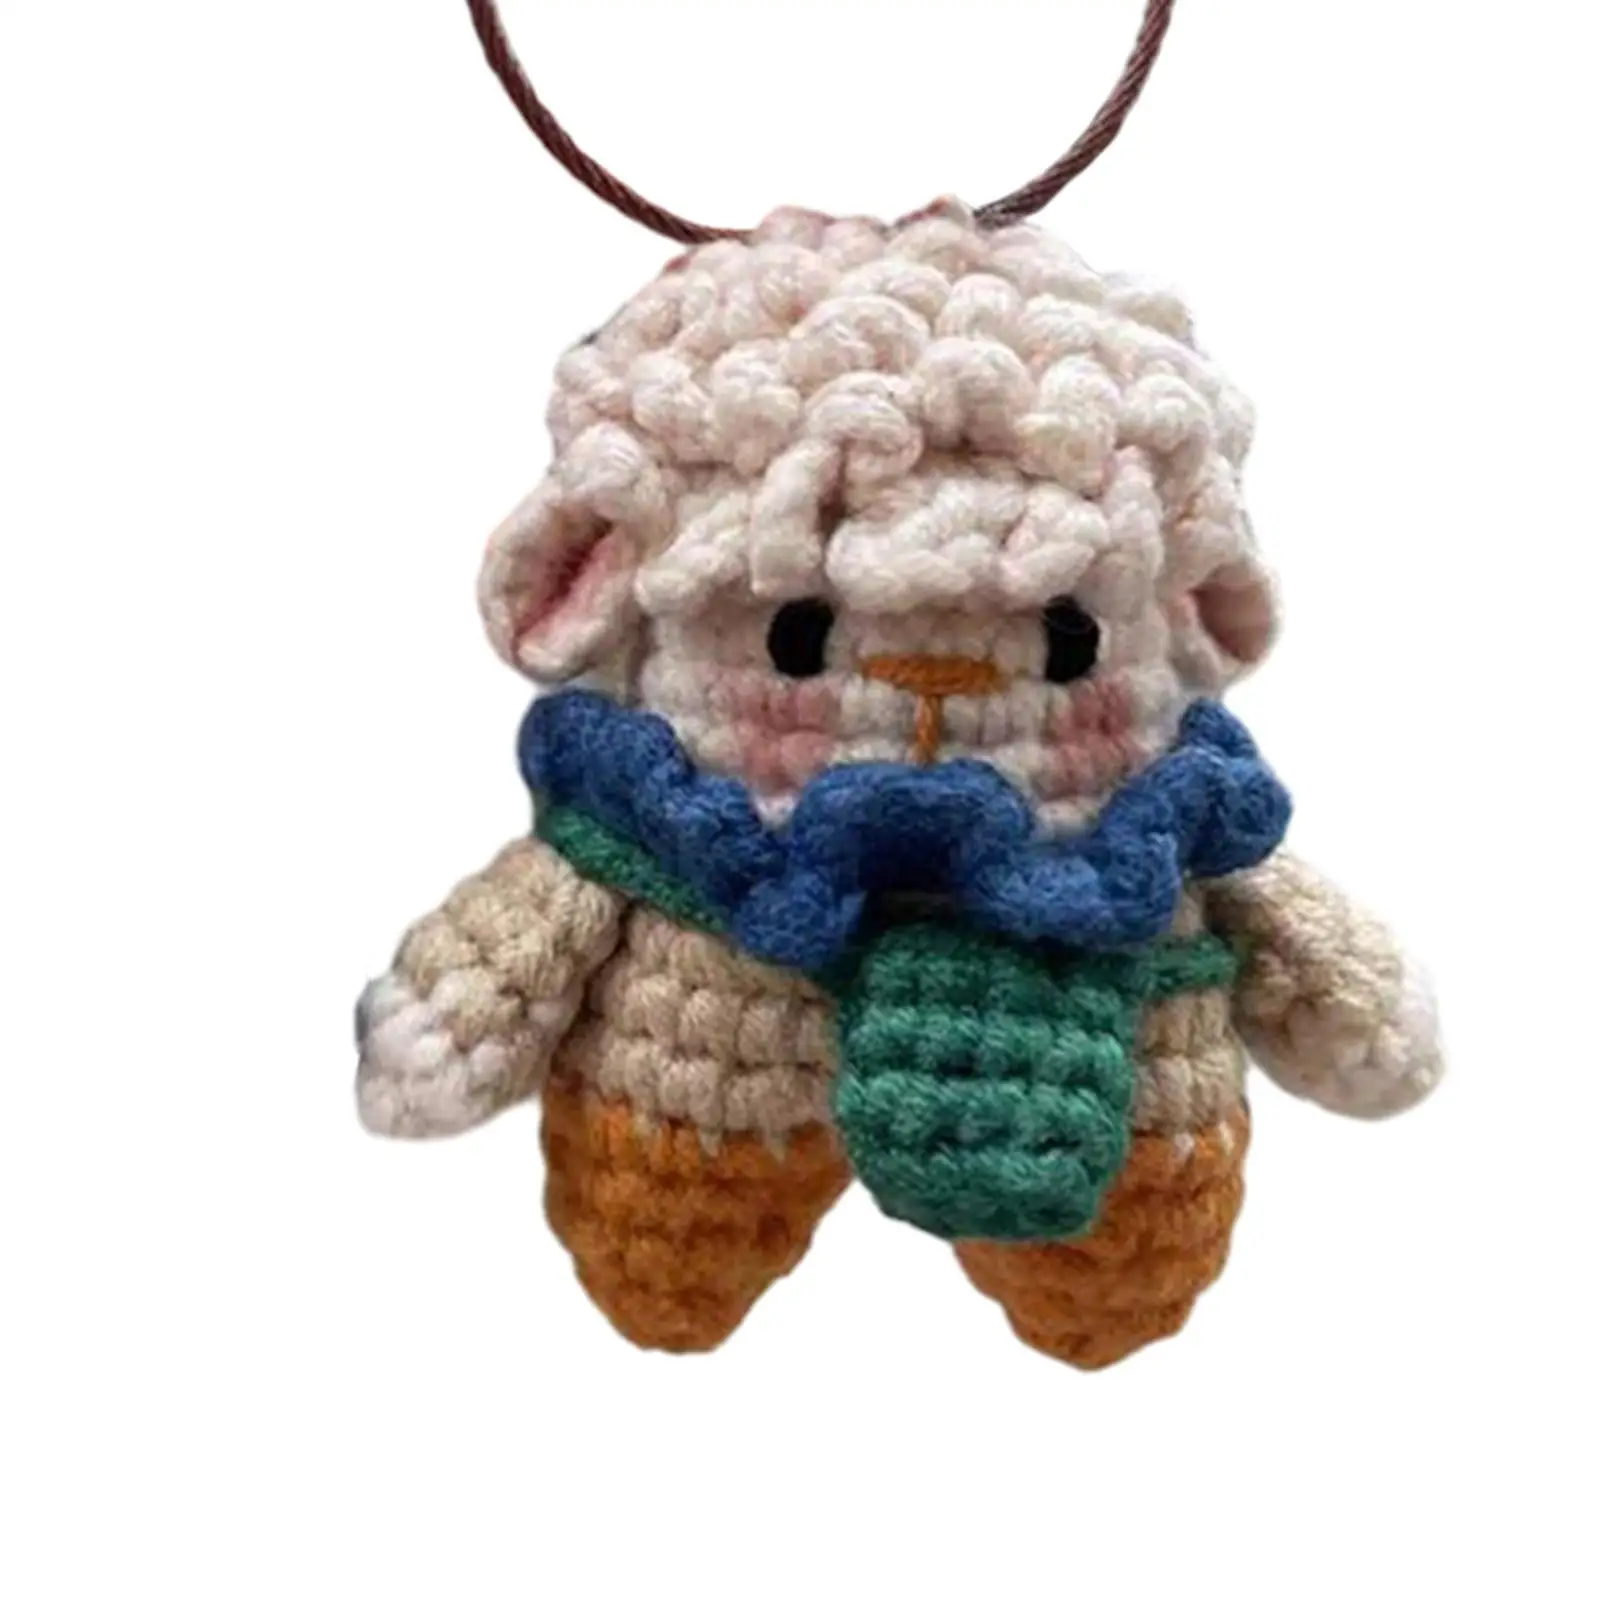 Keychain Pendant Crochet Material Package Crocheting Craft Set Beginners Make Your Own Doll Hanging Ornament Hand Knitting Toy